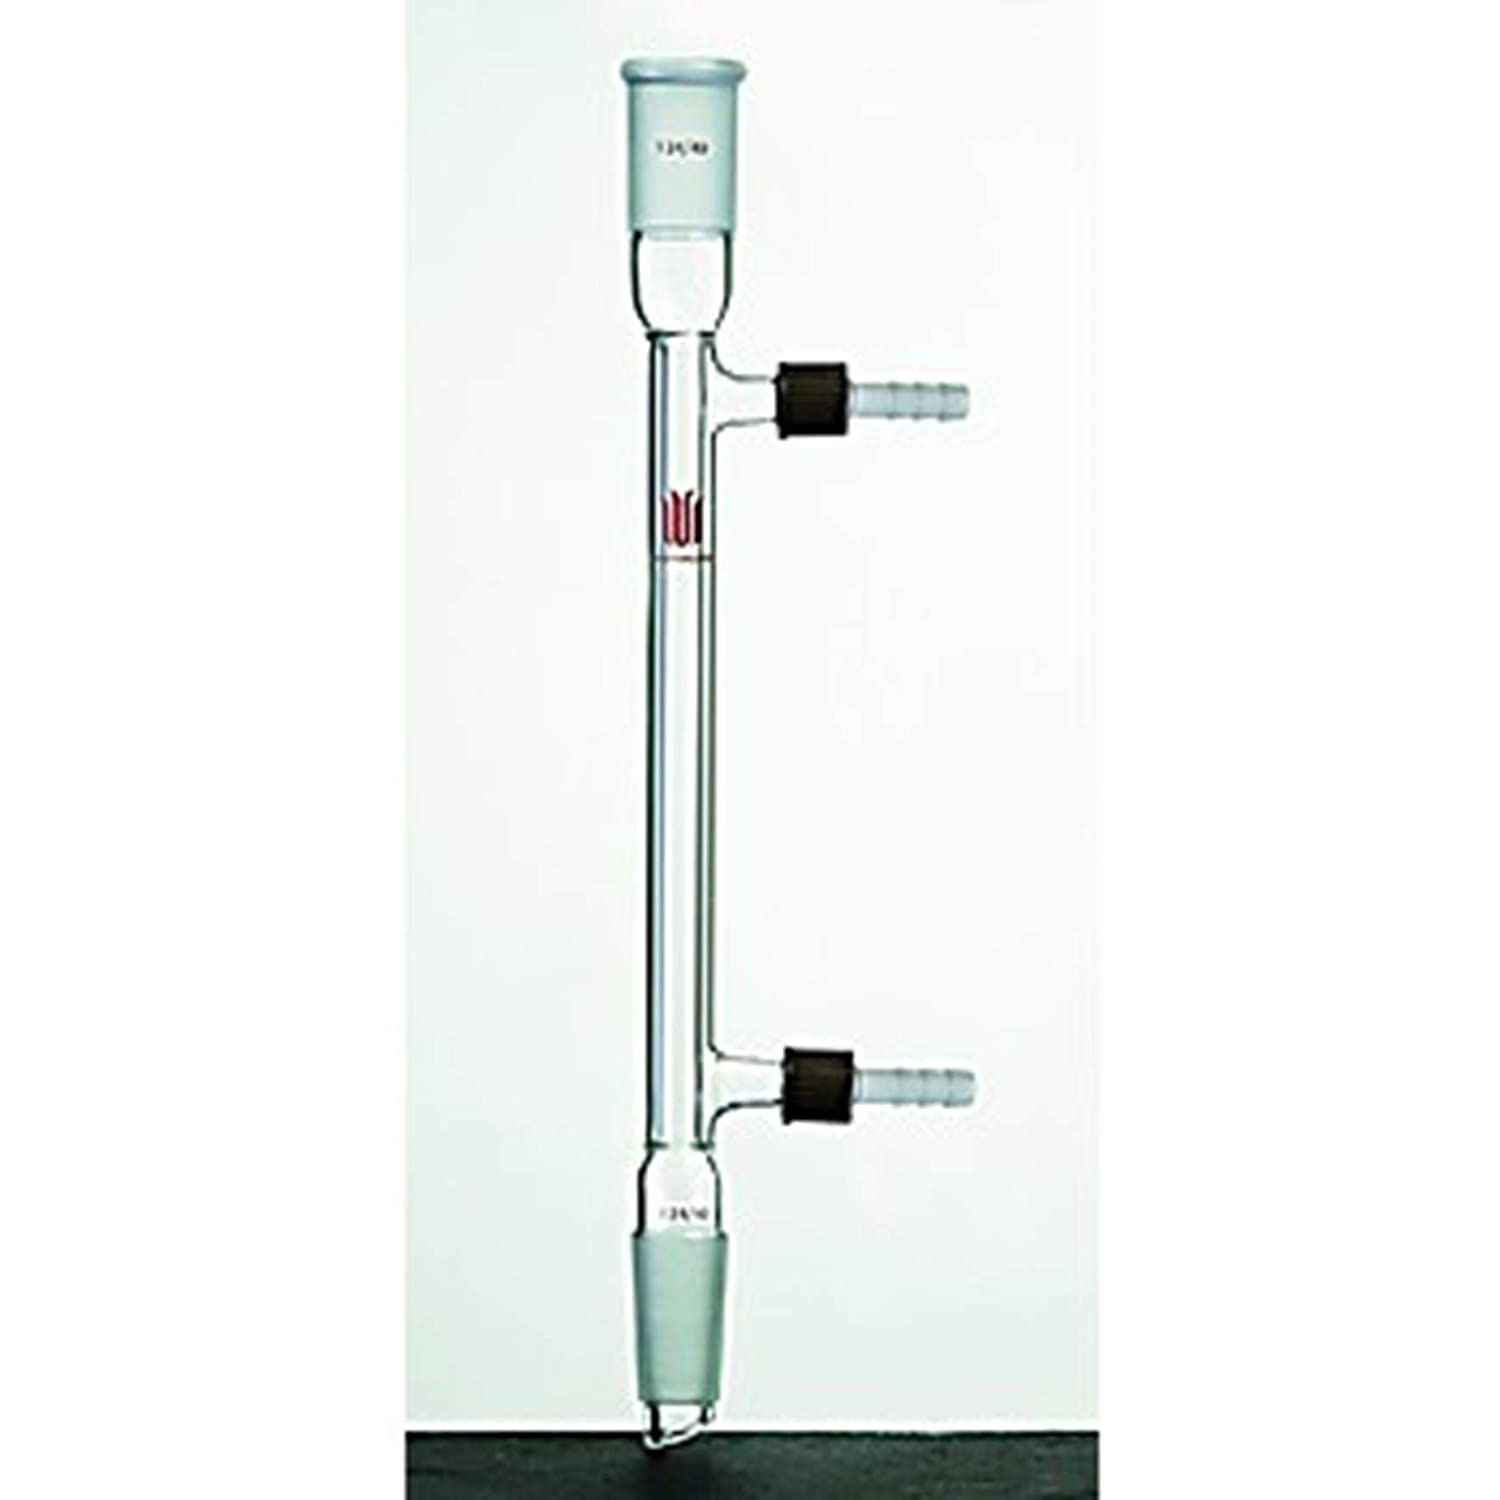 Kemtech America C550190 Synthware West Condenser, Removable Hose Connection, 14/20 Joint, 190 mm Jacket Length